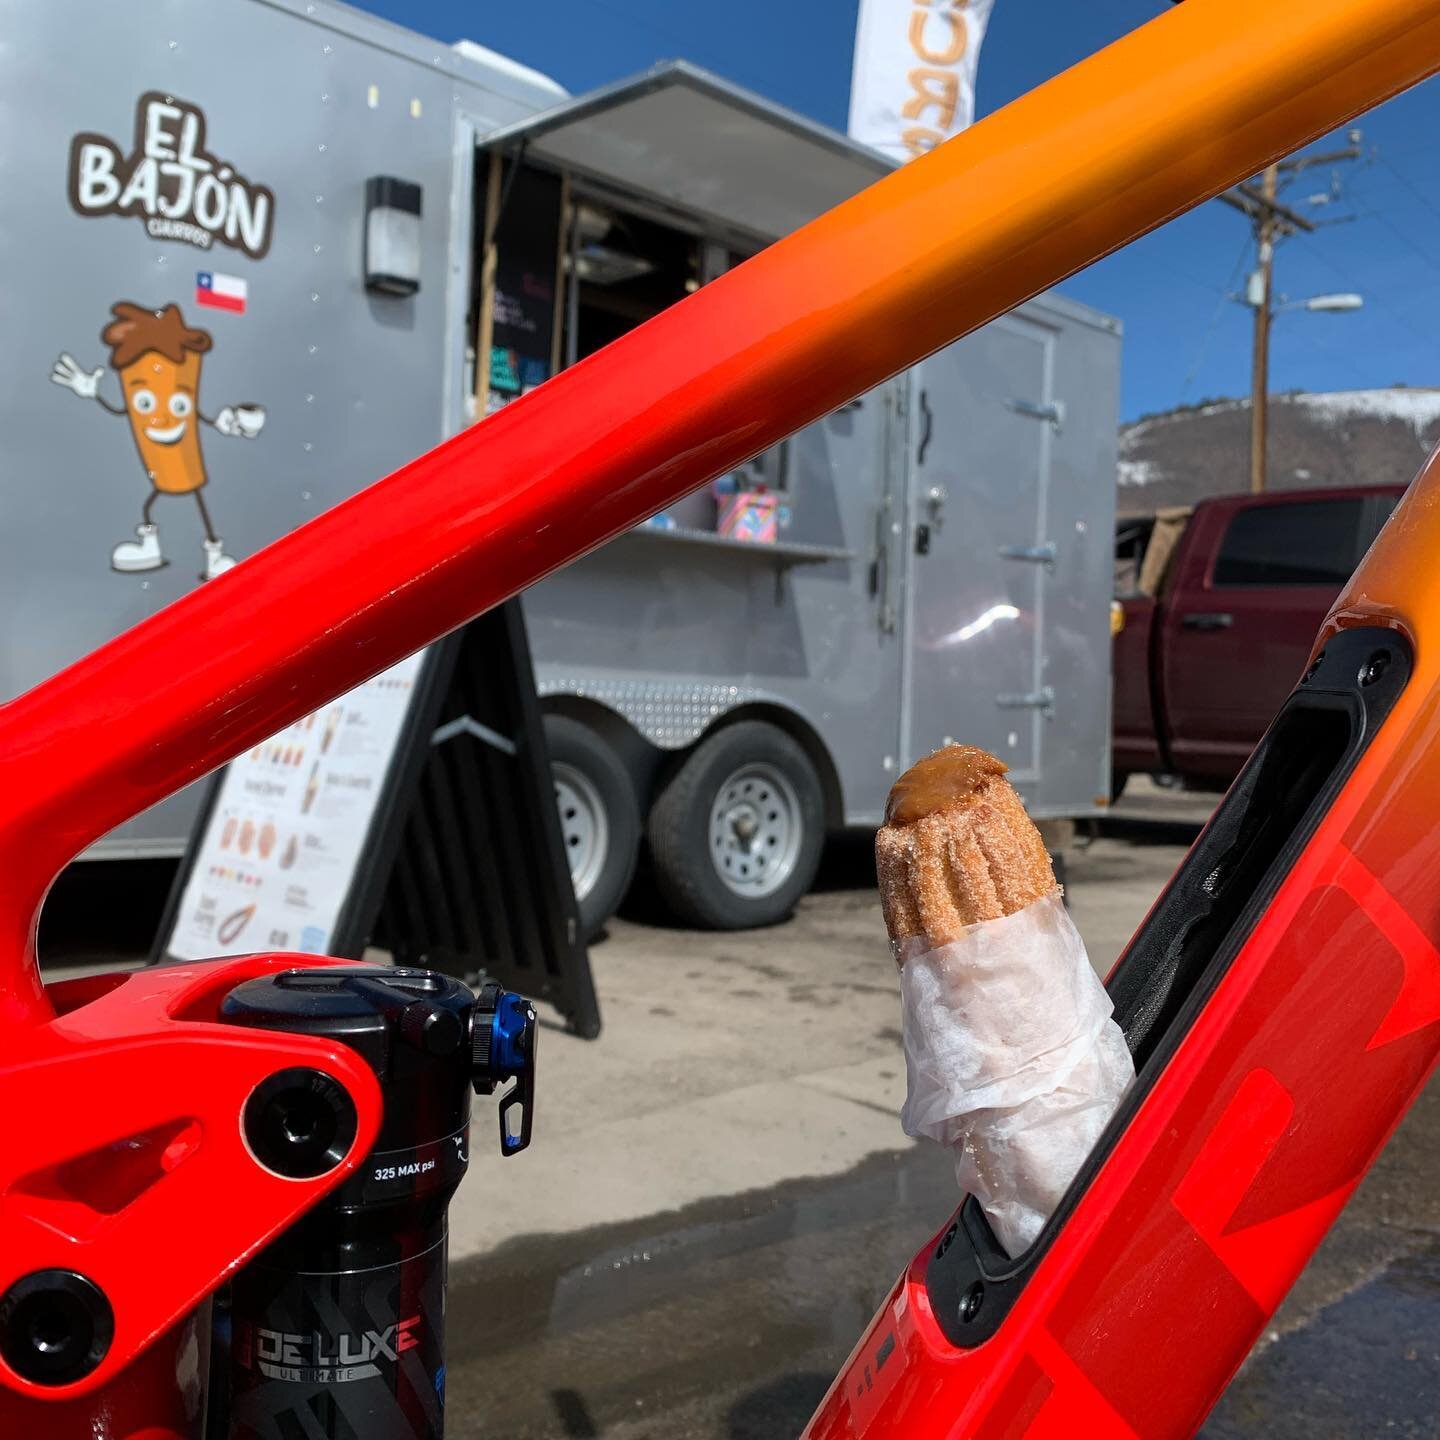 Post-ride churro? You can pack enough dulce de leche filled churros in the @trekbikes BITS downtube storage for the whole crew. 3 hours left to come get some from @elbajonchurros !